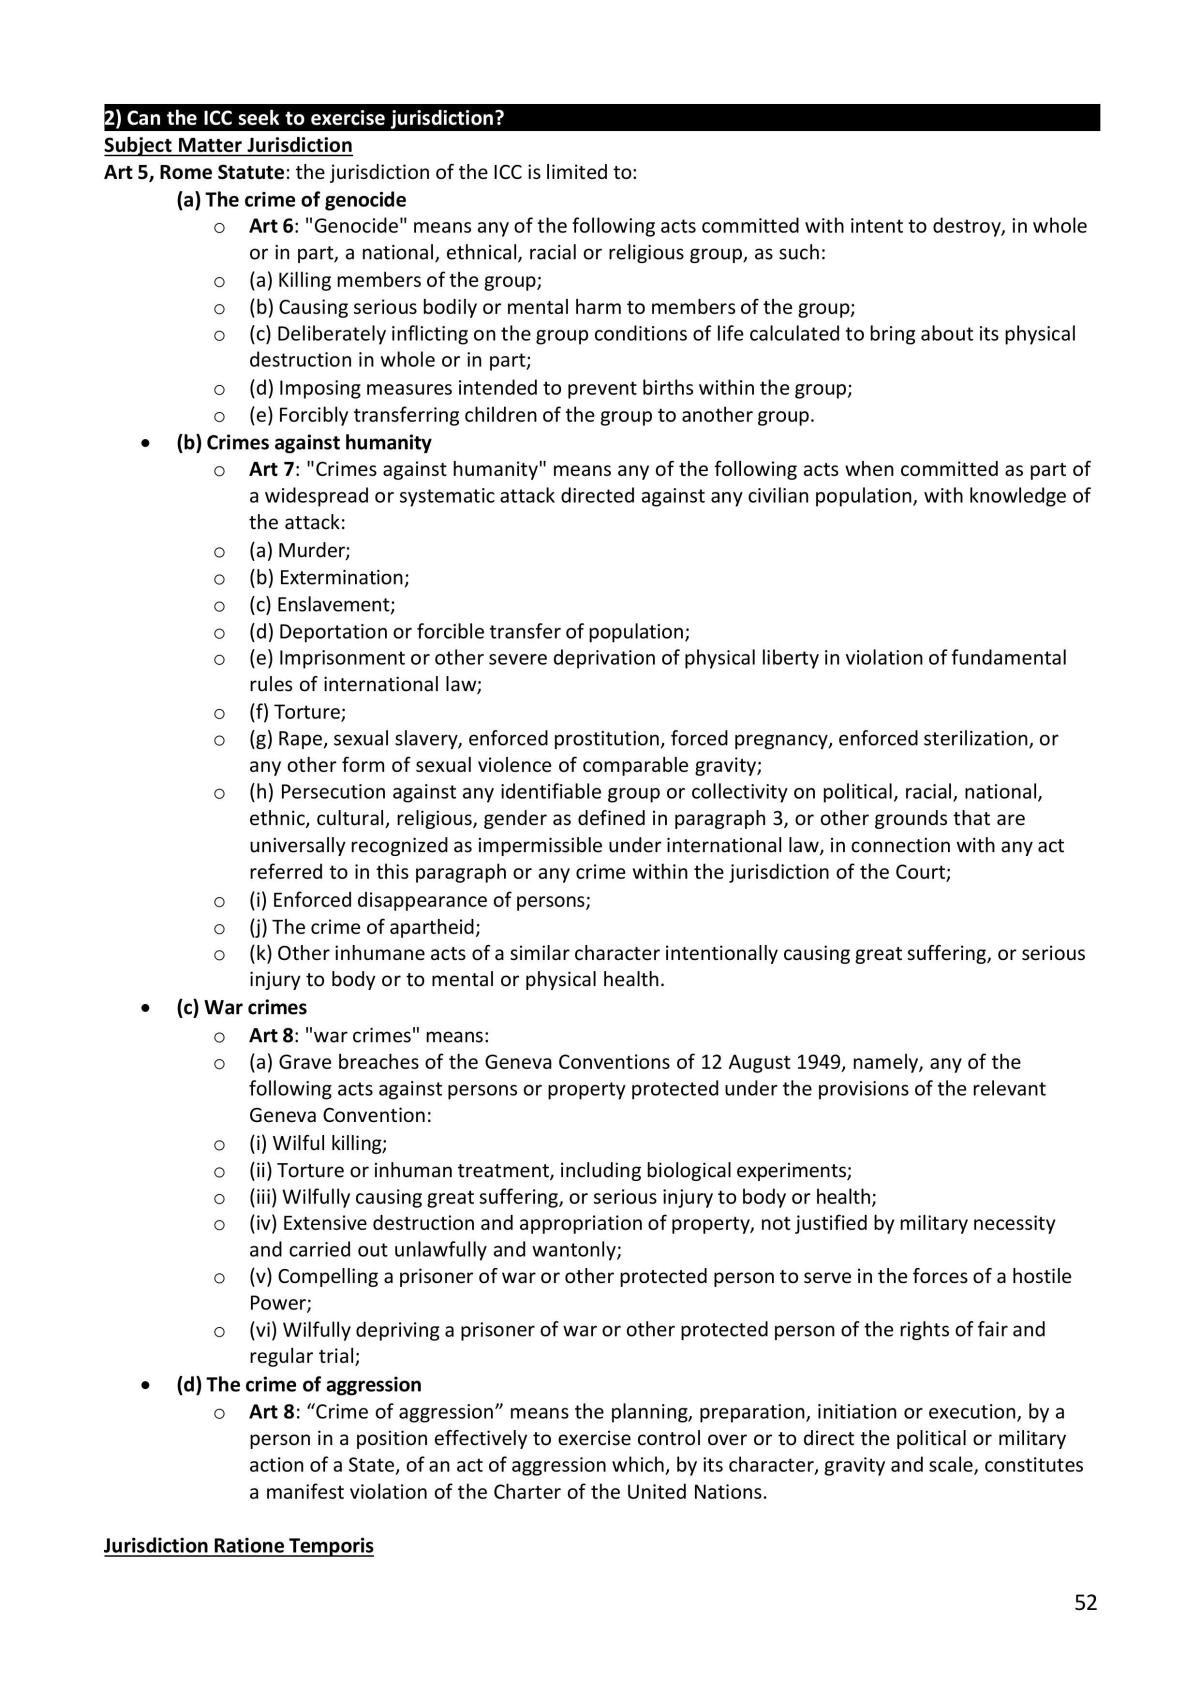 LAWS1023 Full Summary (104 pages) - Page 52